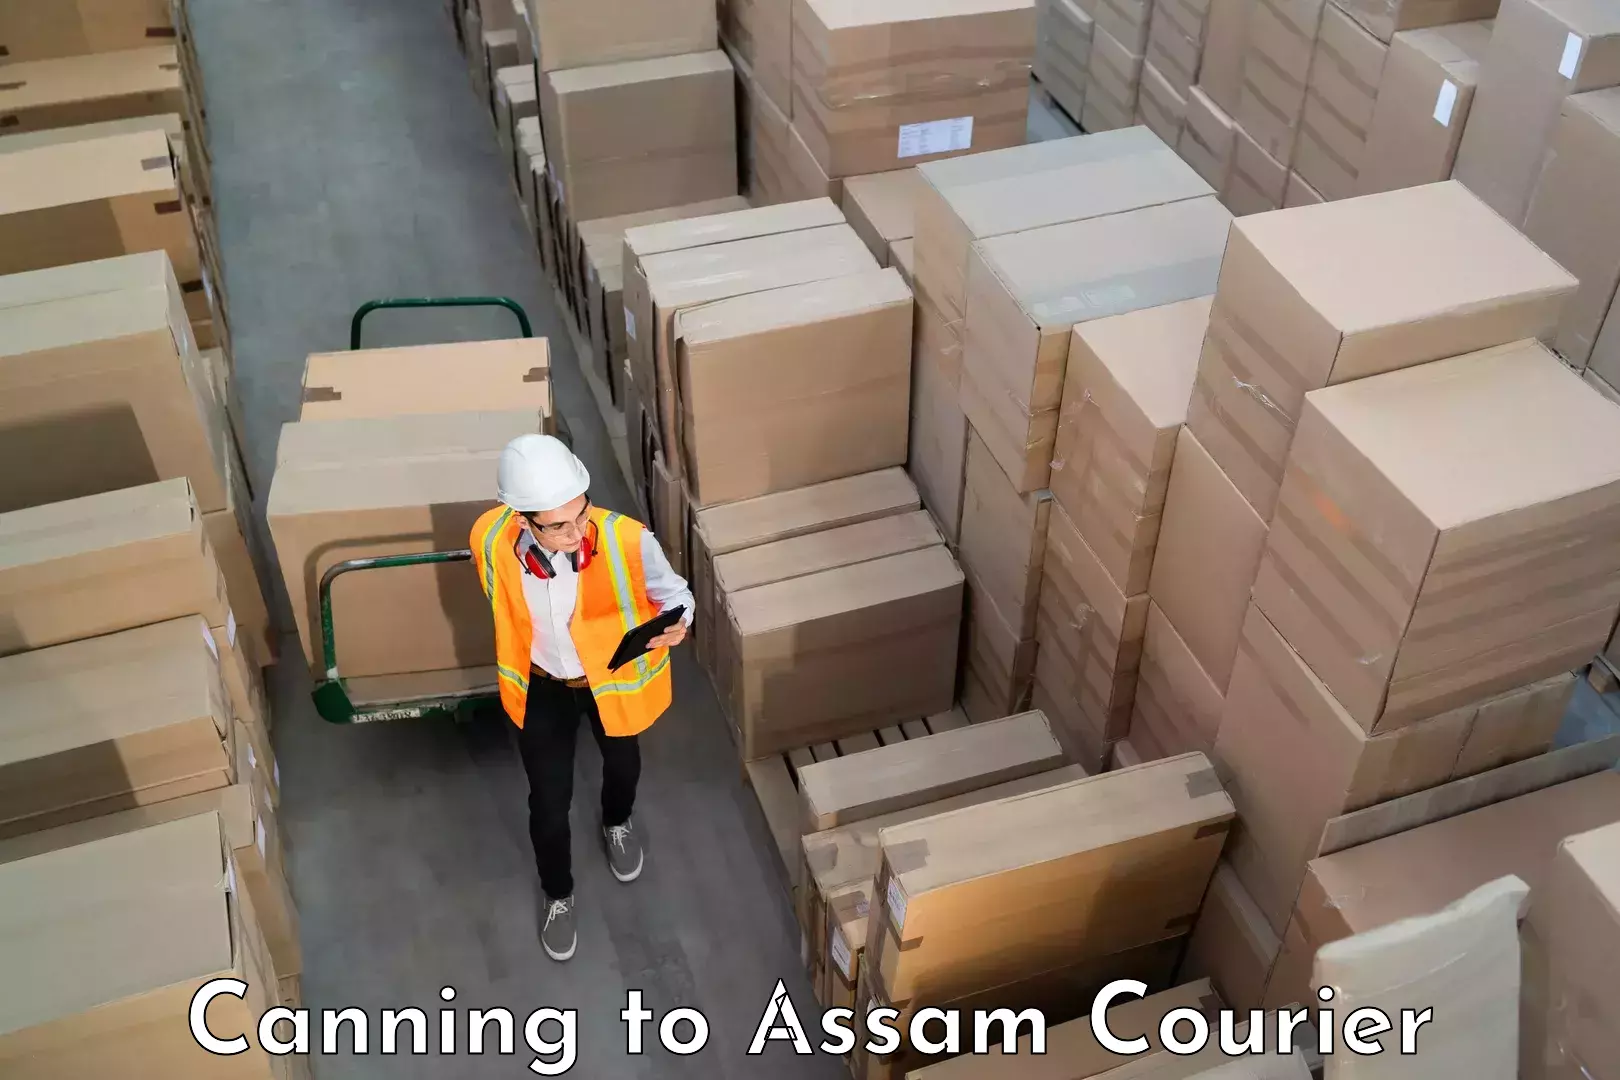 Luggage dispatch service Canning to Lala Assam